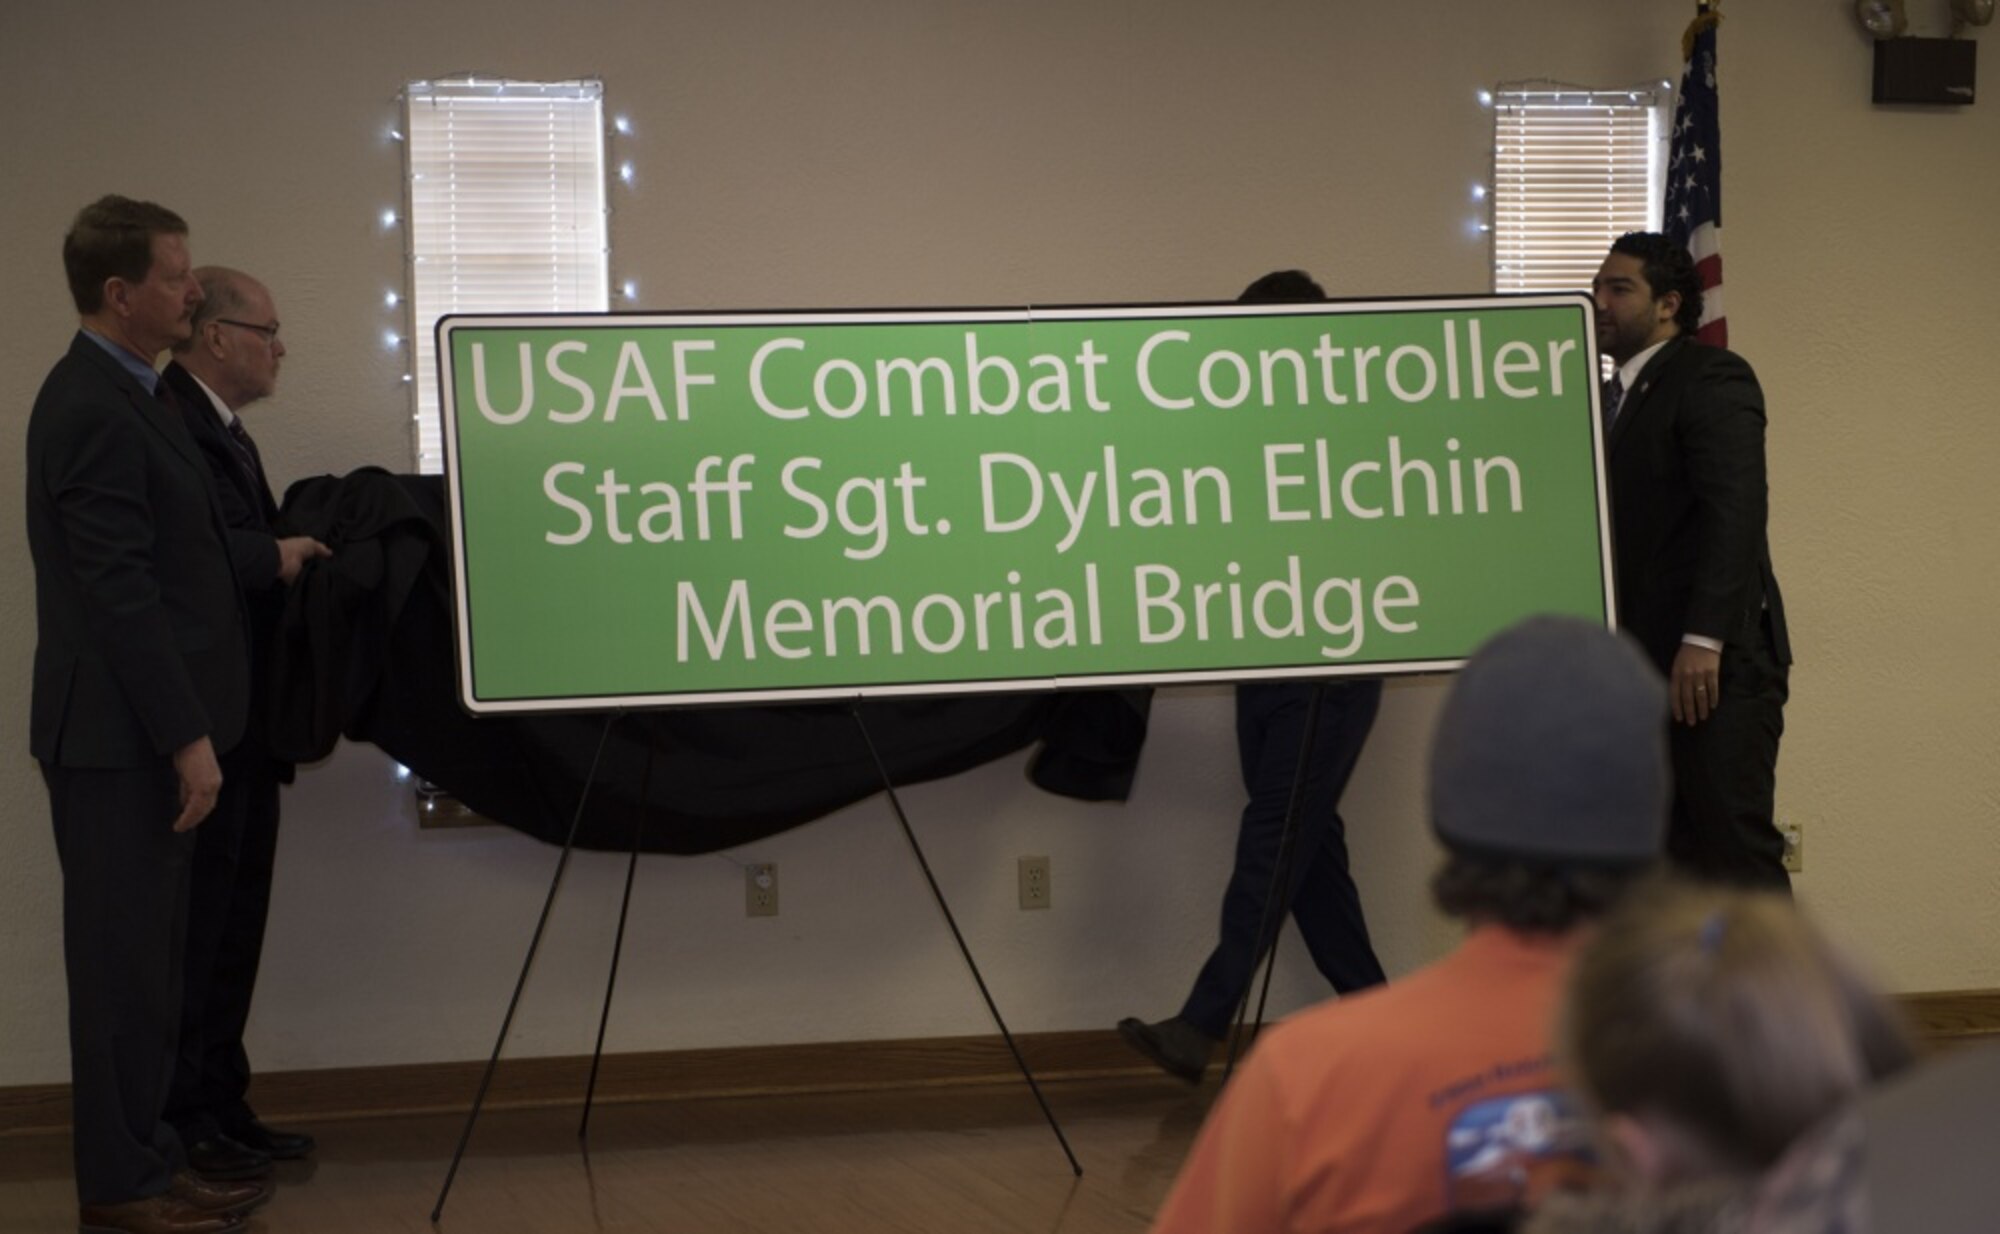 Pennsylvania Senator Elder Vogel Jr. and his staff unveil the newly named “USAF Combat Controller Staff Sgt. Dylan Elchin Memorial Bridge” at a ceremony in Rochester, Pa. Feb 29, 2020. The bridge honors the service of Special Tactics combat controller Staff Sgt. Dylan Elchin who was killed in action alongside two U.S. Army Special Forces members when their vehicle struck an improvised explosive device in Ghazni Province, Afghanistan, Nov. 27, 2018.